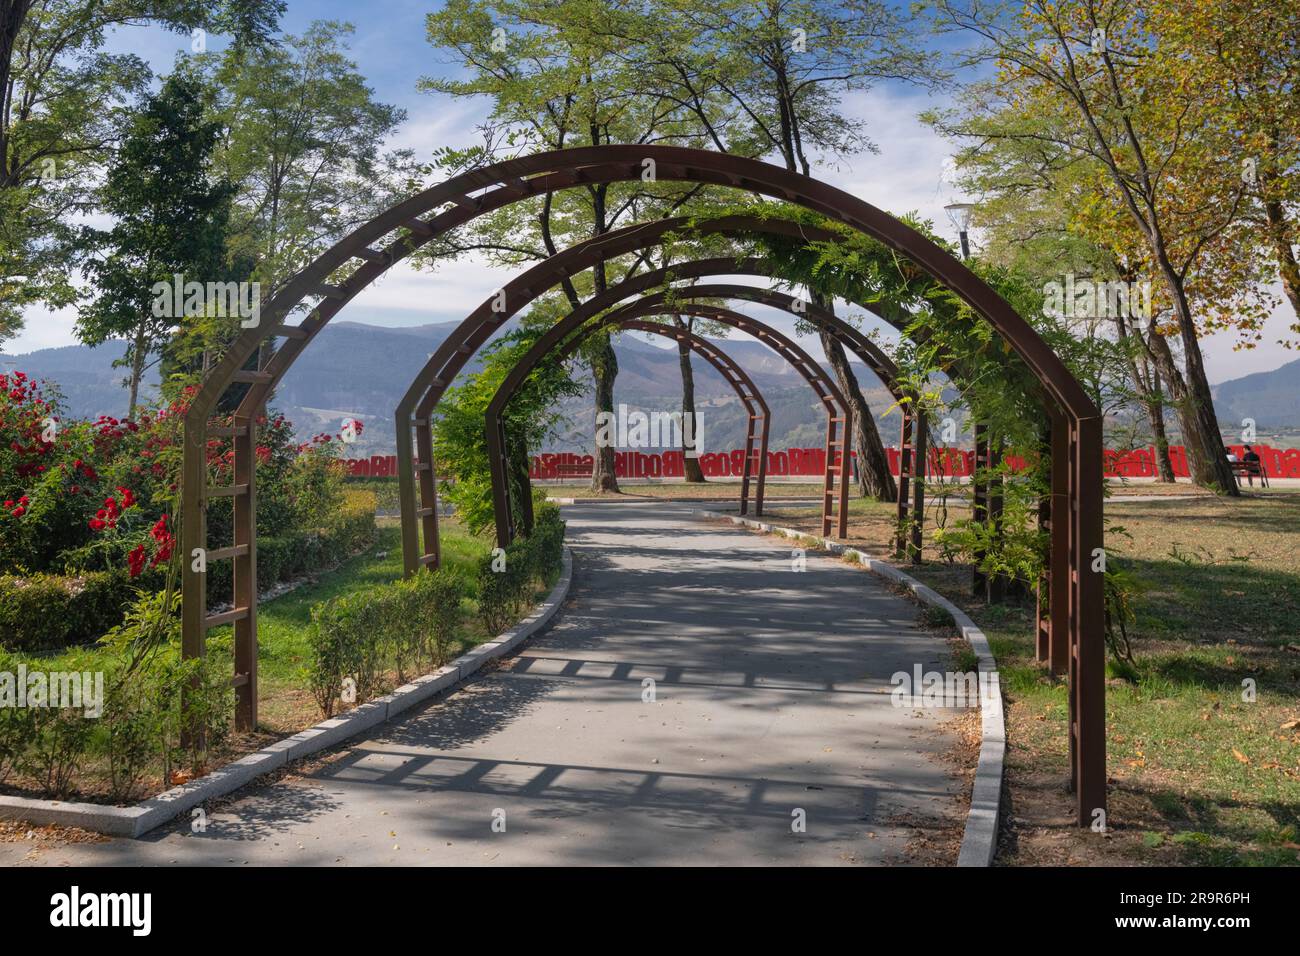 Spain, Basque Country, Bilbao, Mount Artxanda Park with the famous Bilbao sign in the background. Stock Photo